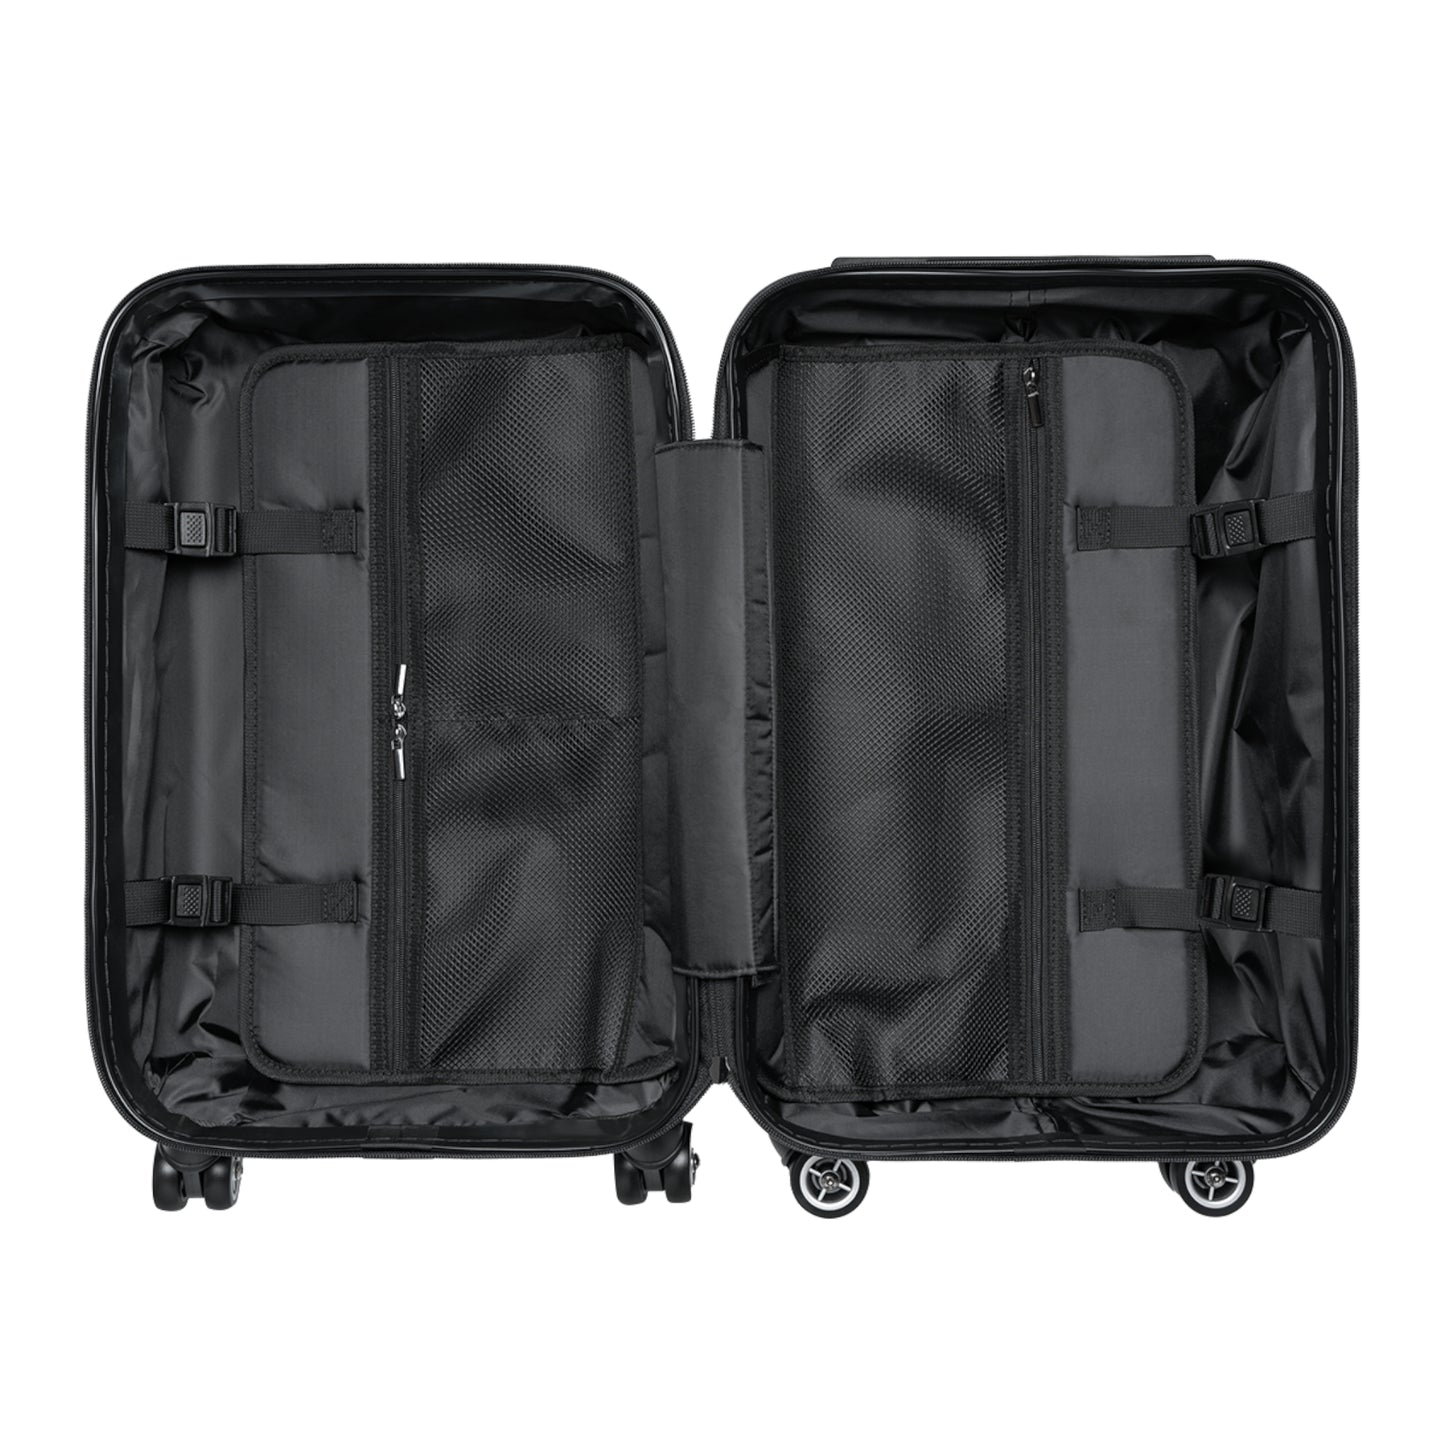 inside view of opened suitcase pockets zippers straps black